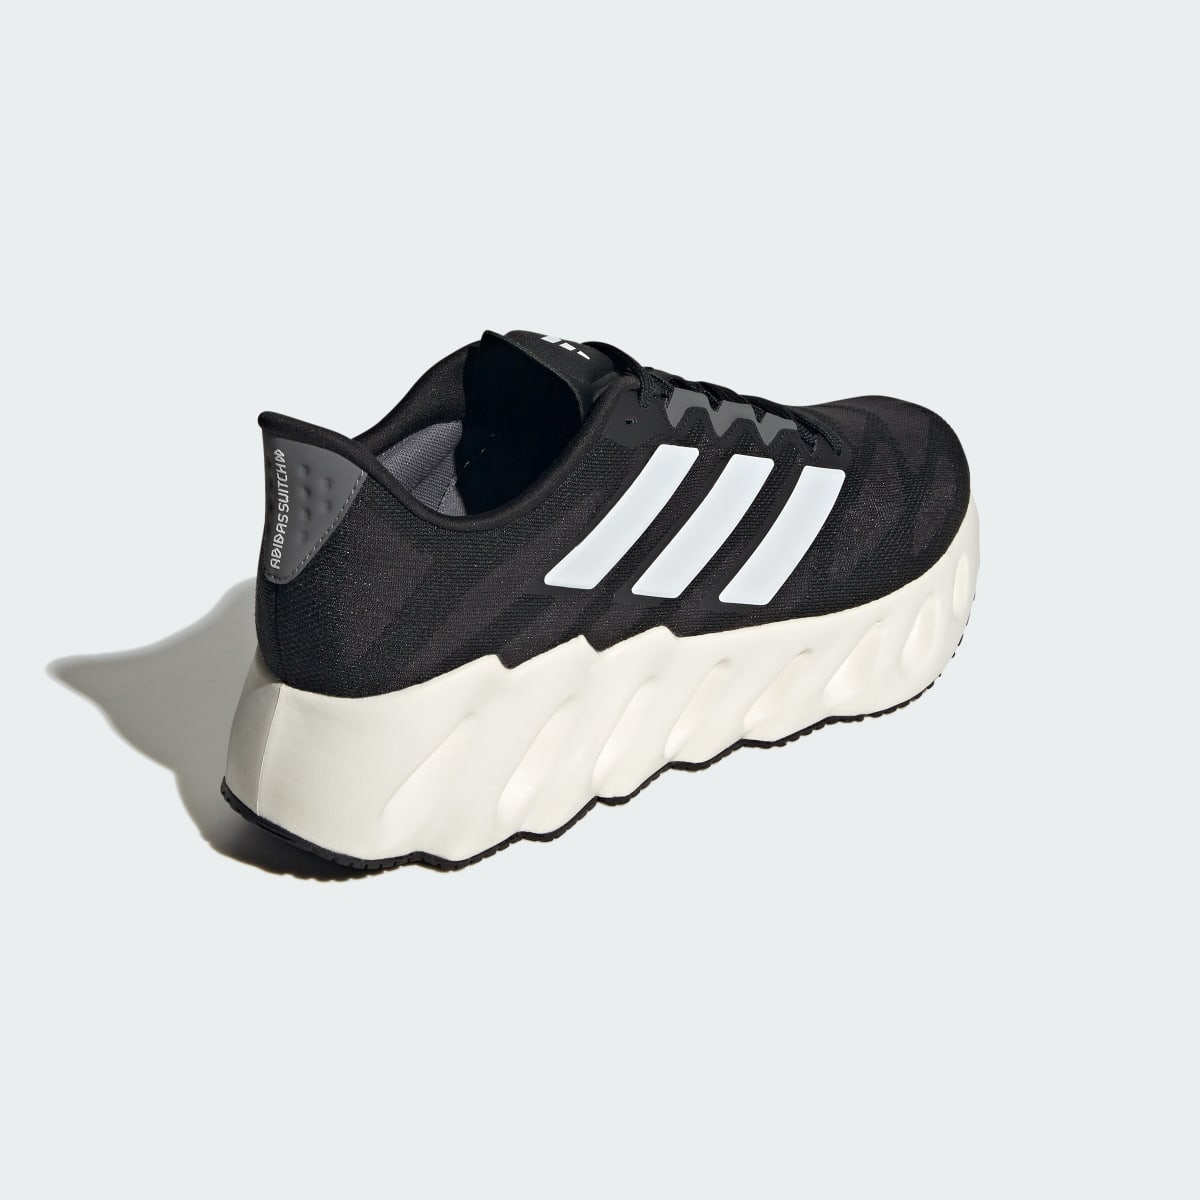 Adidas Switch FWD Running Shoes. 6